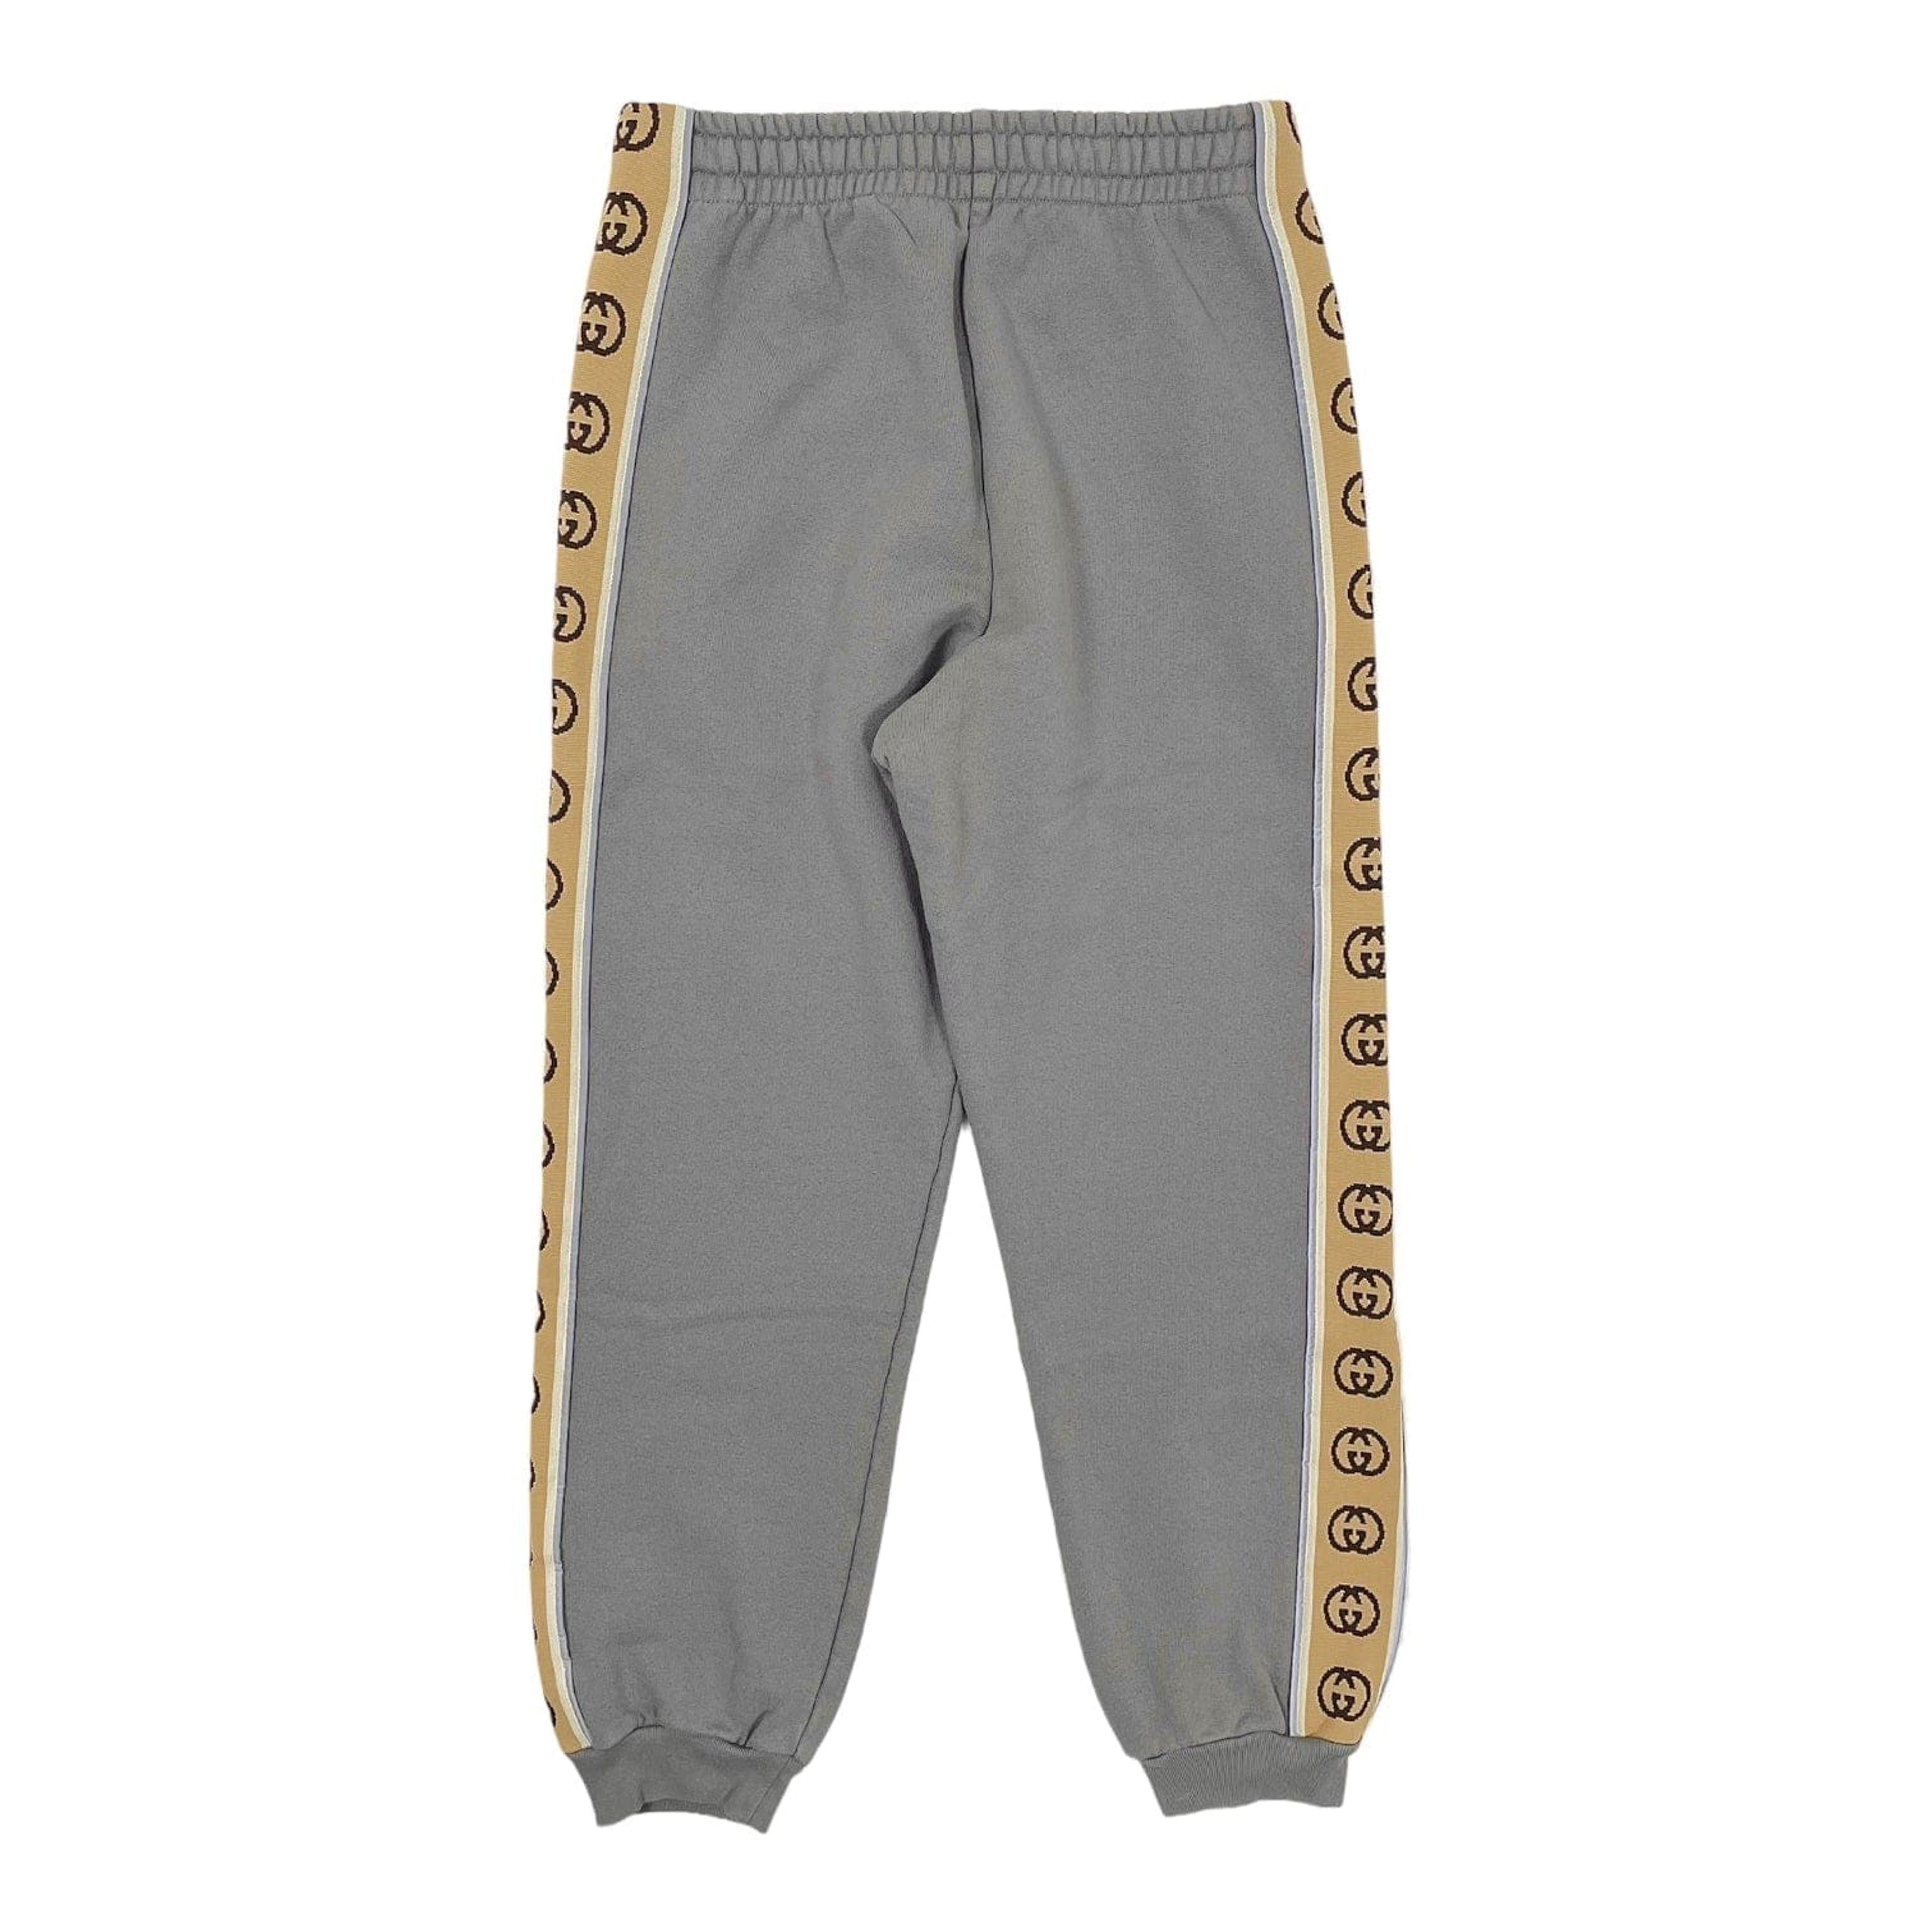 Alternate View 1 of Gucci GG Striped Sweatpants Grey Pre-Owned